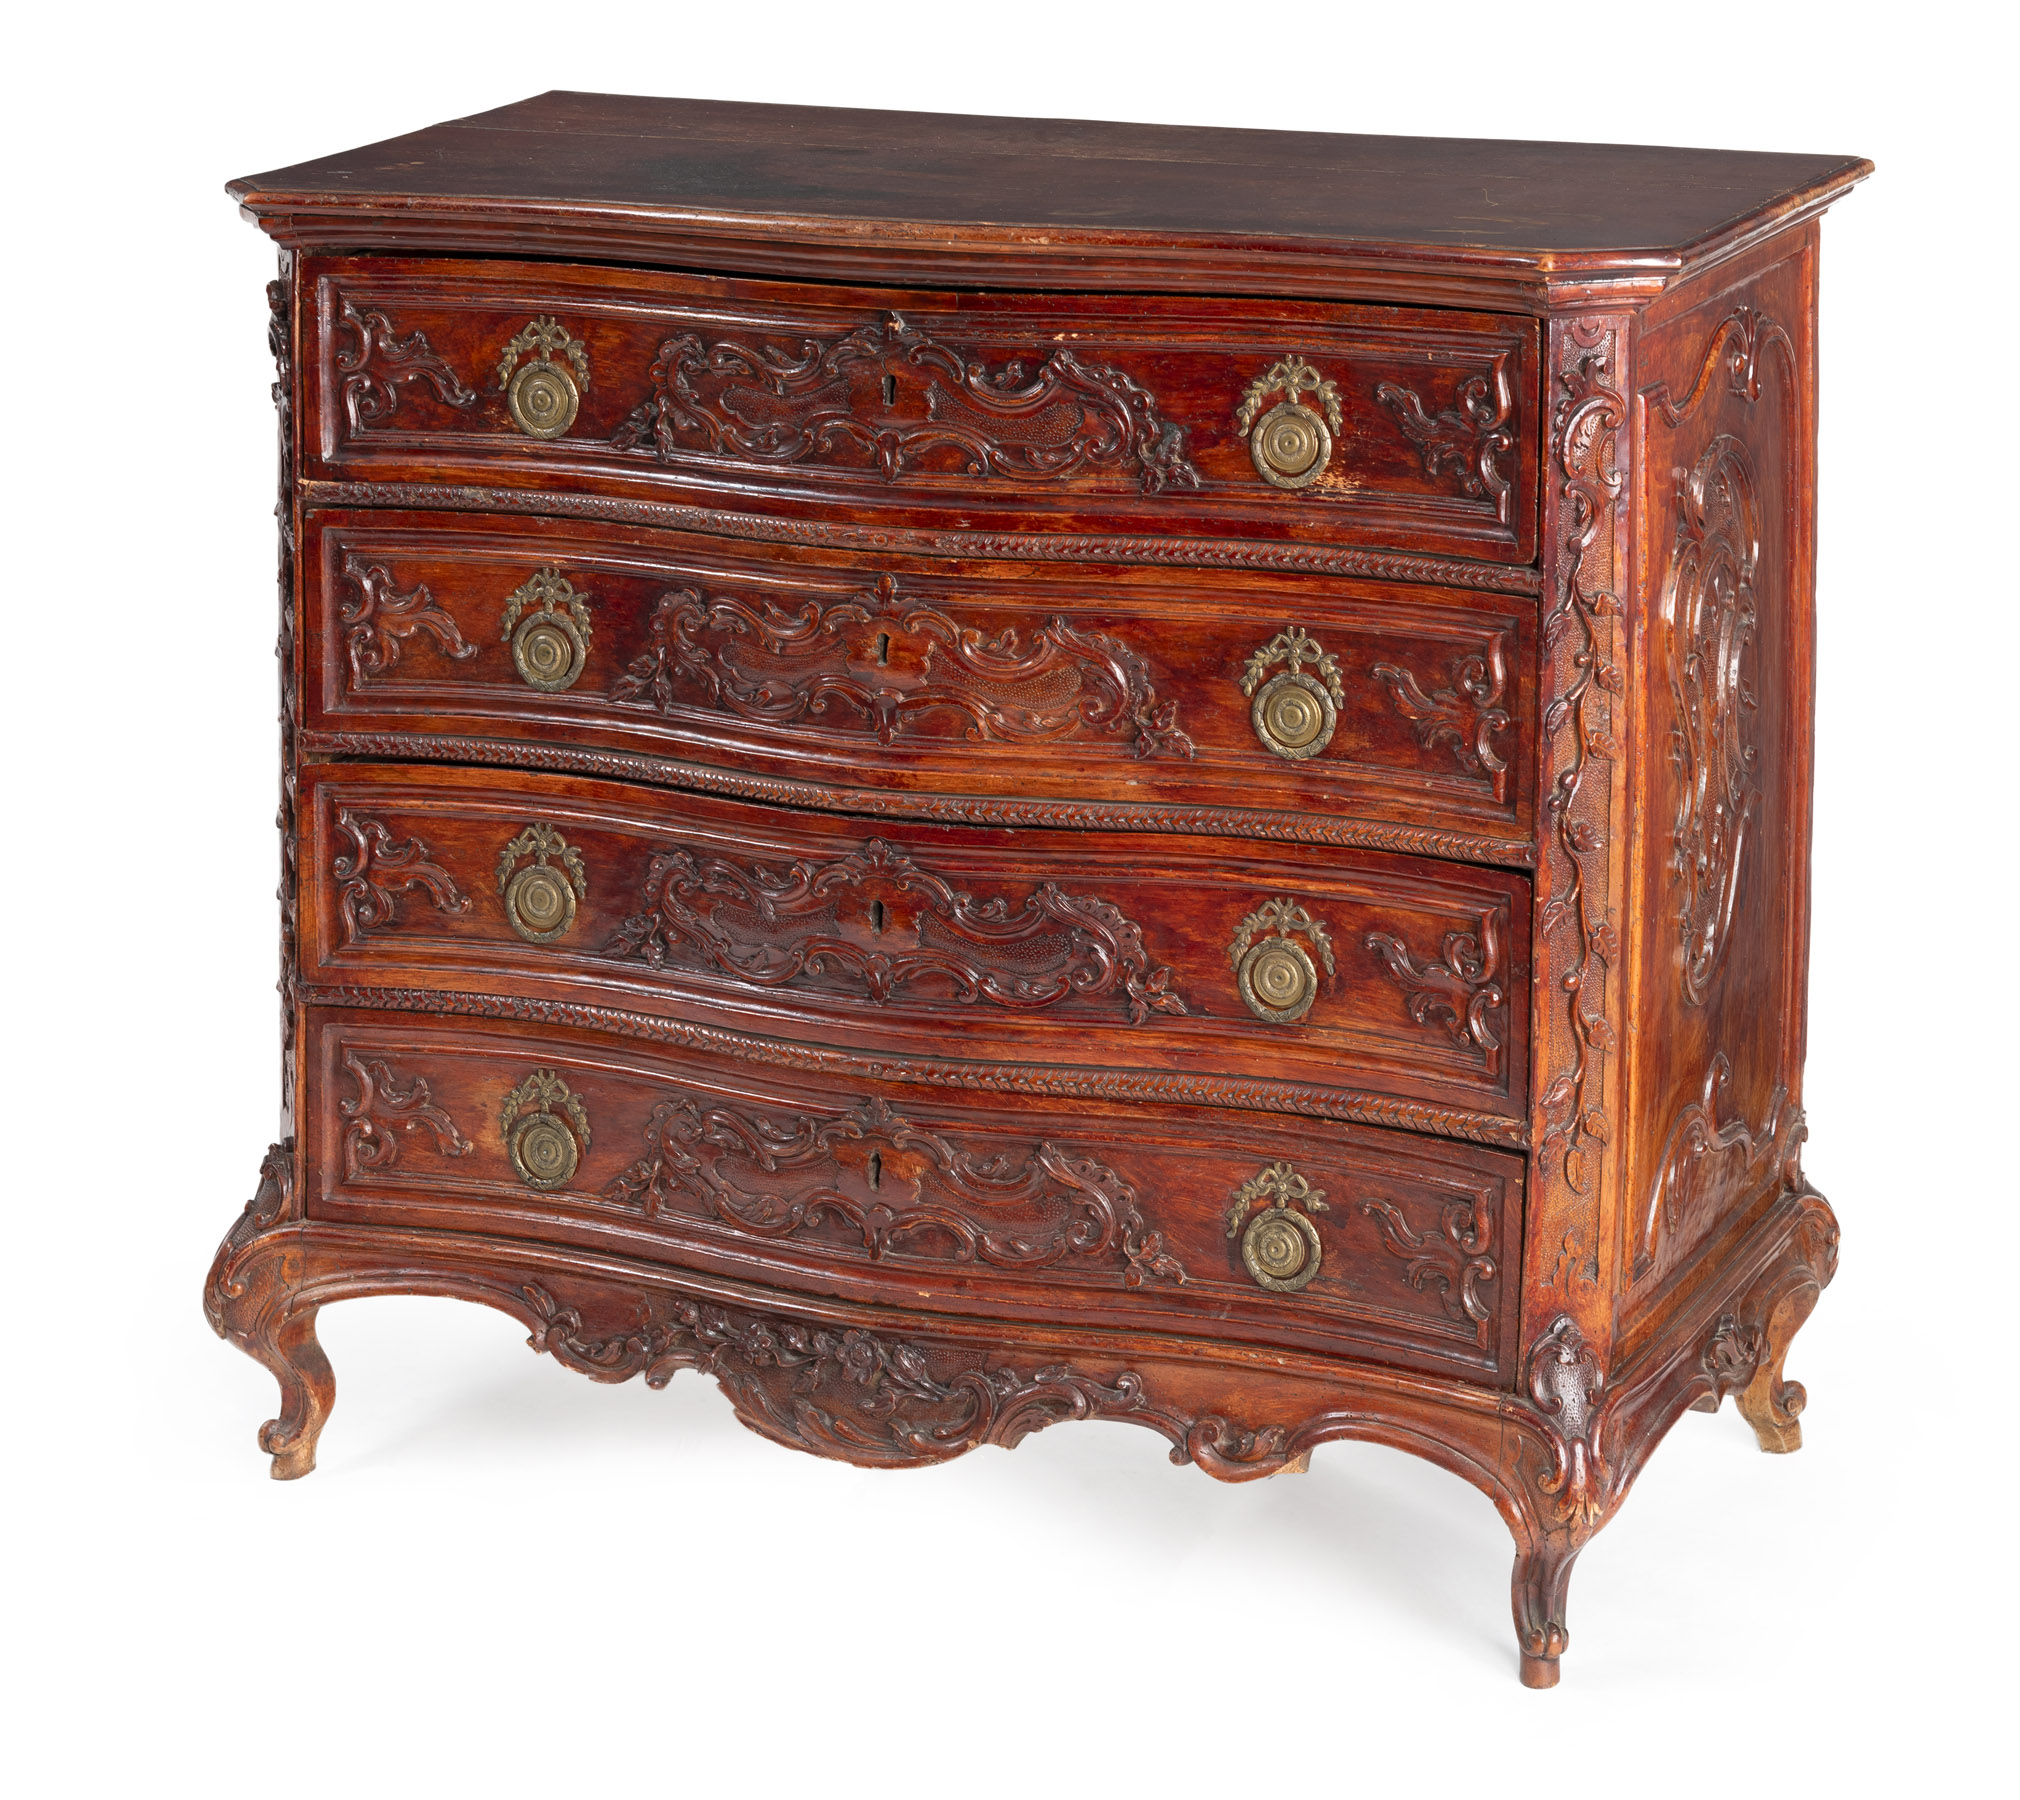 A LARGE BRASS MOUNTED CARVED WALNUT ROCOCO COMMODE